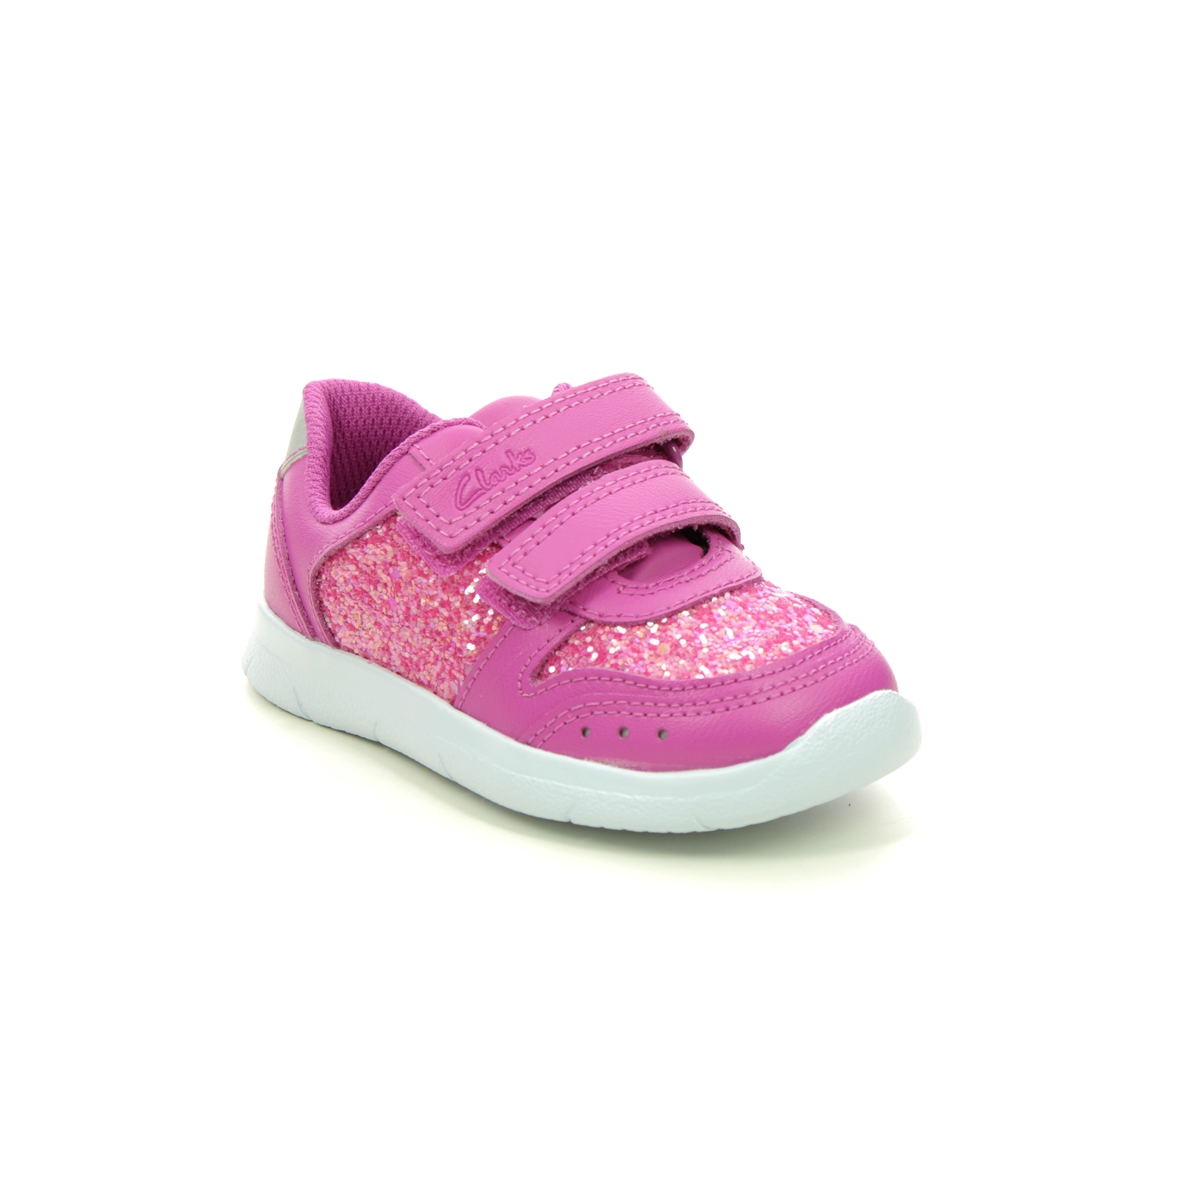 Clarks Ath Sonar T Hot Pink Kids toddler girls trainers 6379-16F